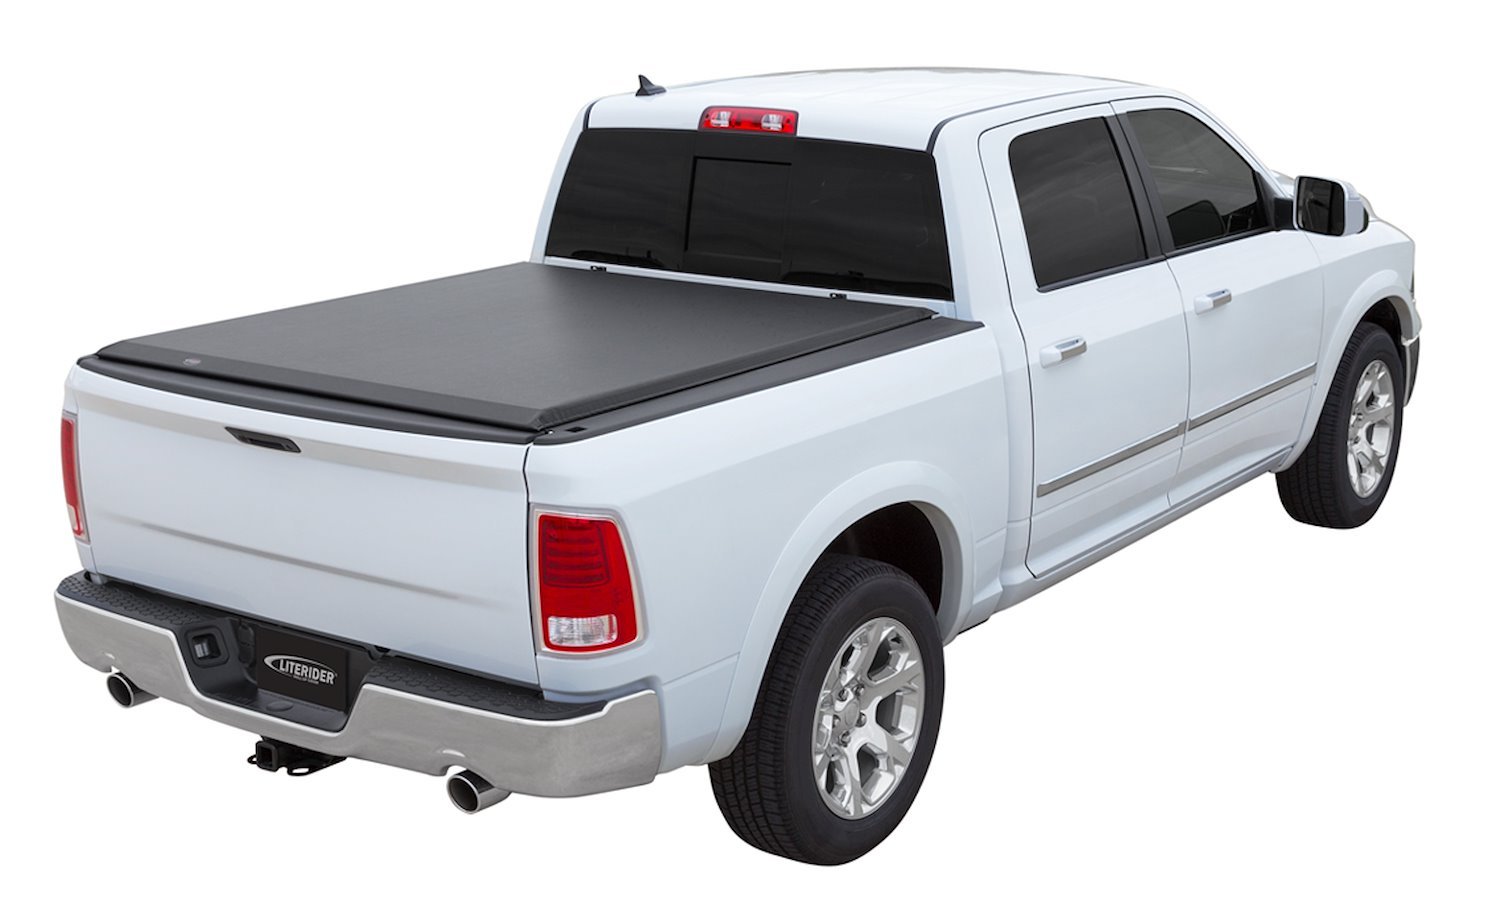 LITERIDER Roll-Up Tonneau Cover, Fits Select Ram 1500, with 6 ft. 4 in. Bed